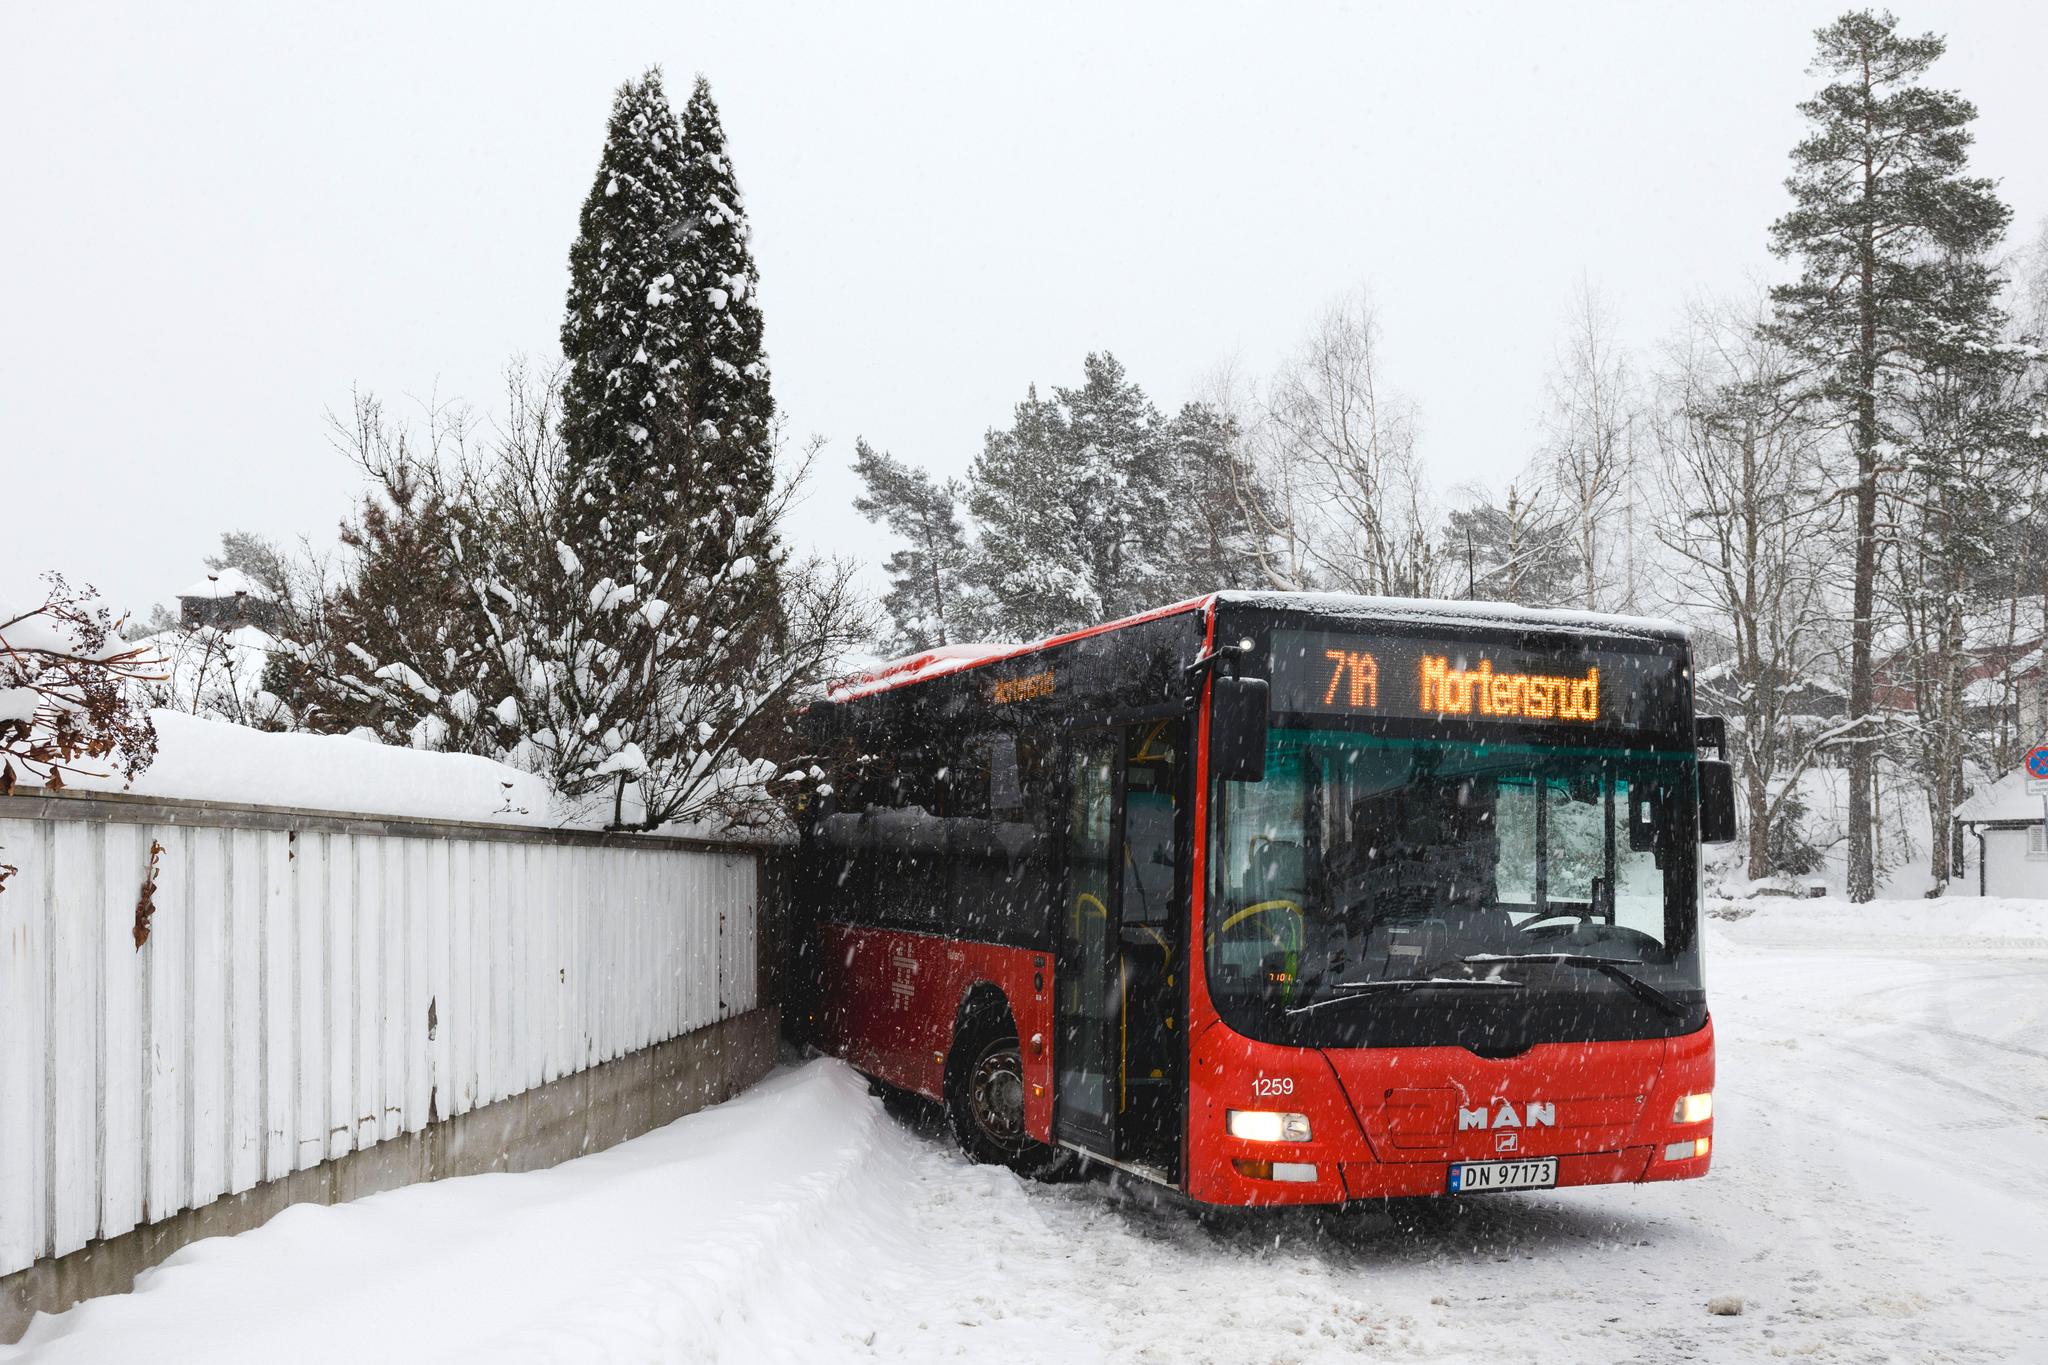 Bus traffic chaos in Oslo area – many central routes cancelled